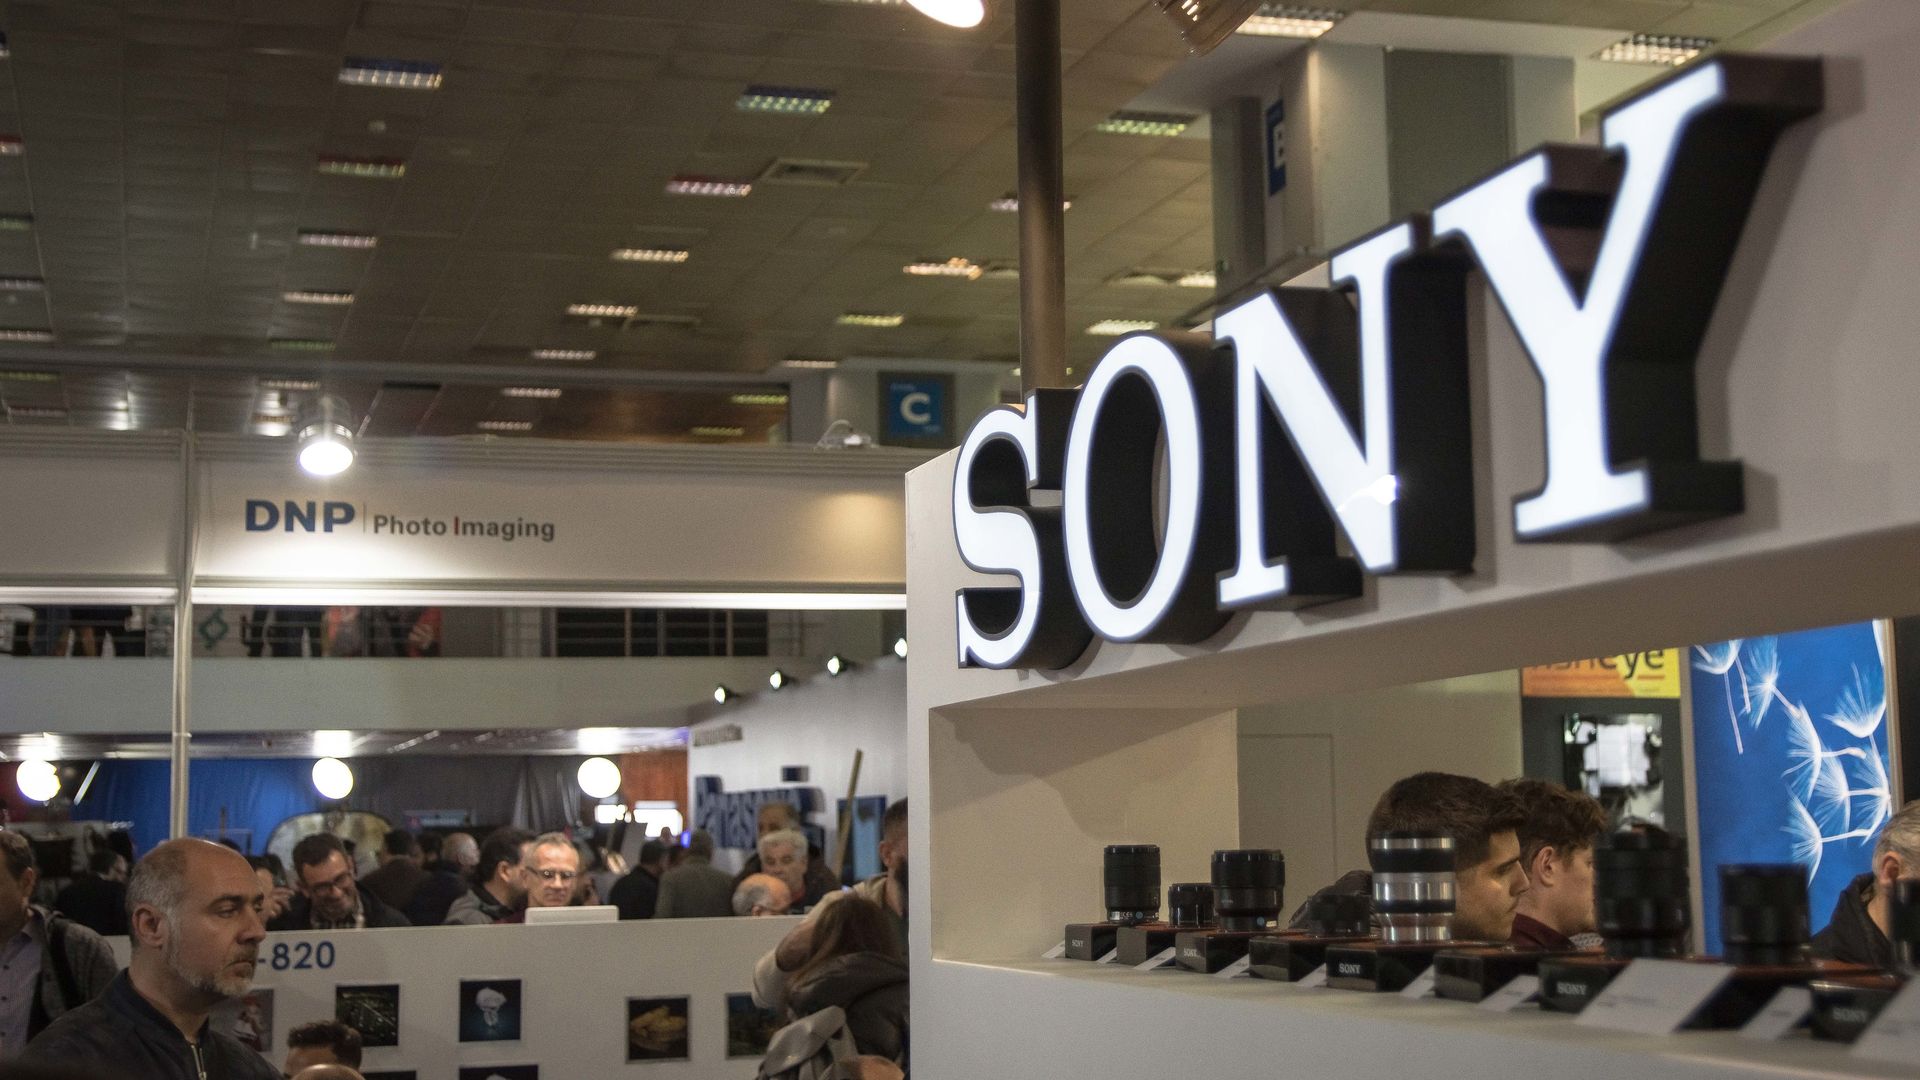 The Sony logo is seen in white on a wall as people walk around and look at phones and other tech.